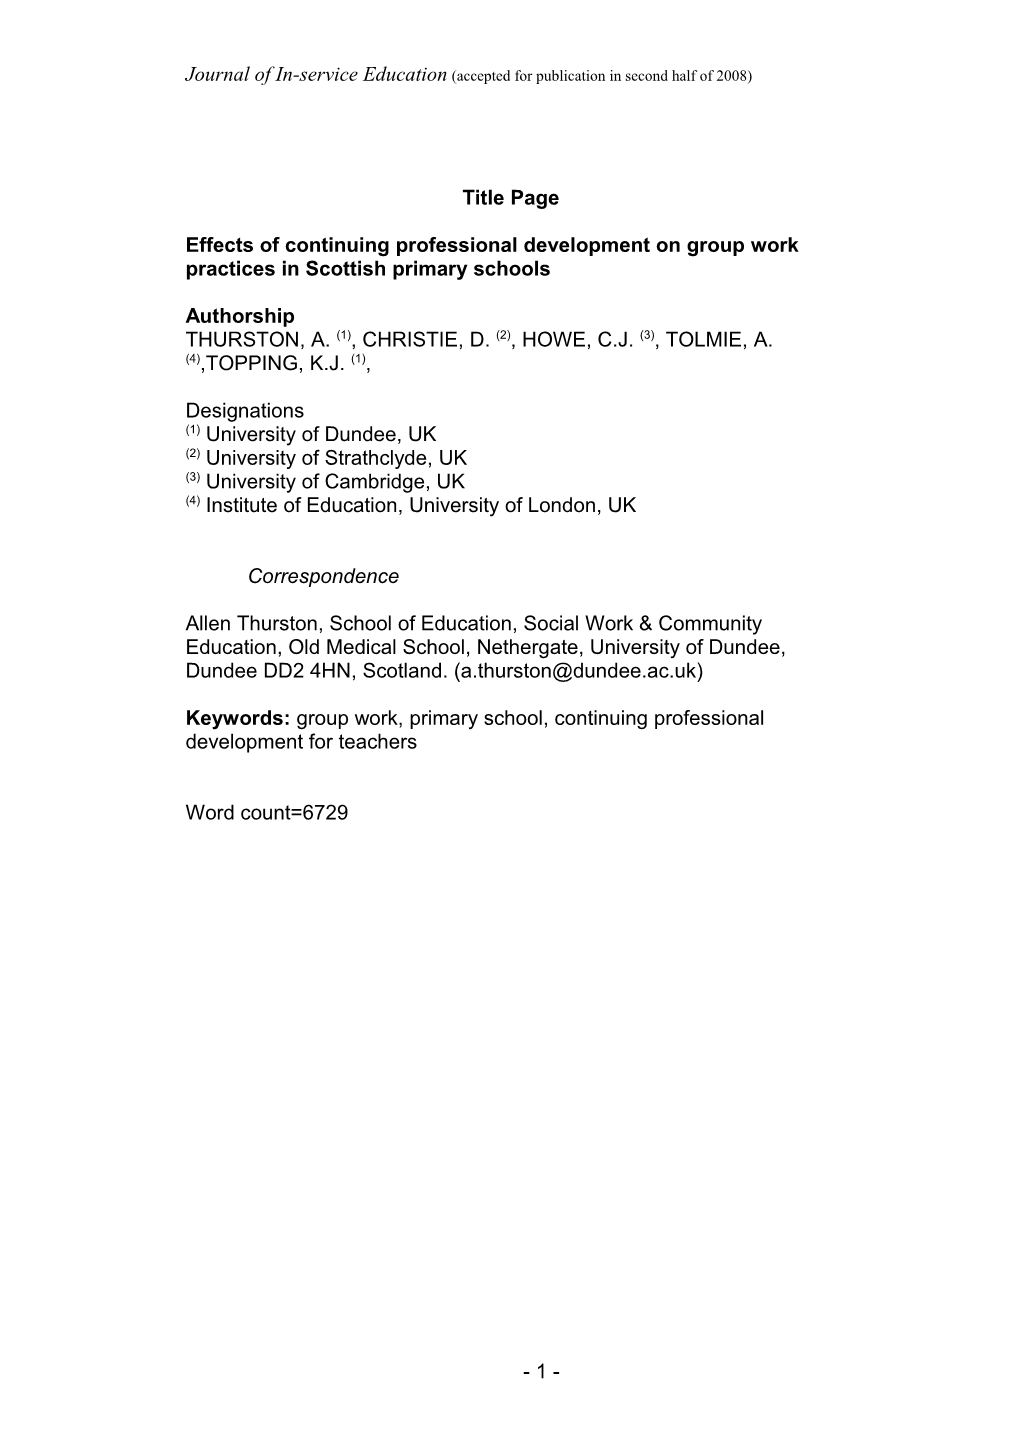 Effects of Continuing Professional Development on Group Work Practices in Scottish